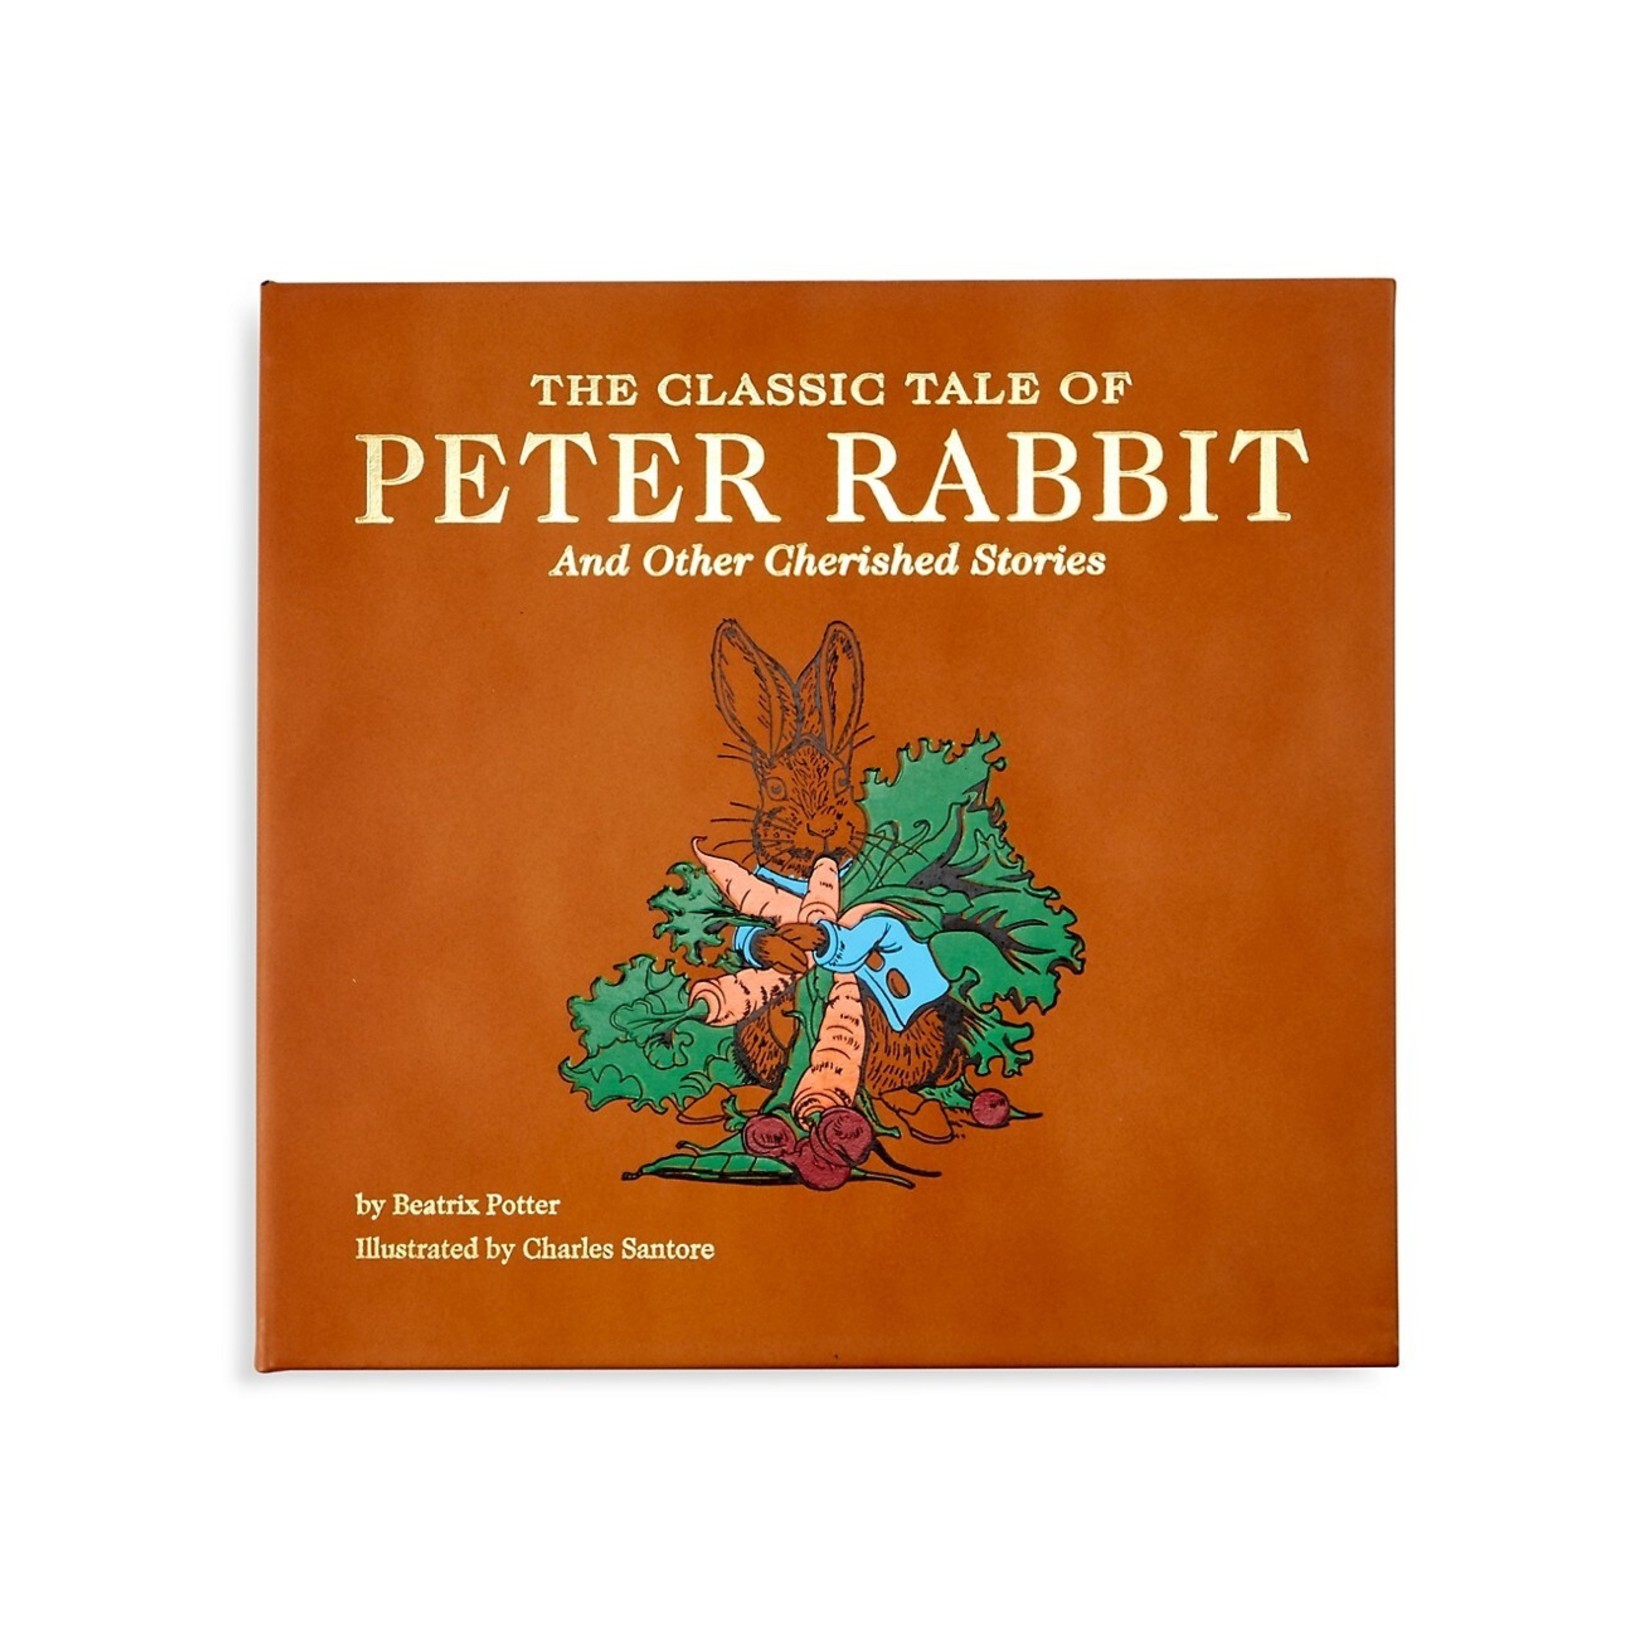 The Classic Tale of Peter Rabbit Leatherbound Edition